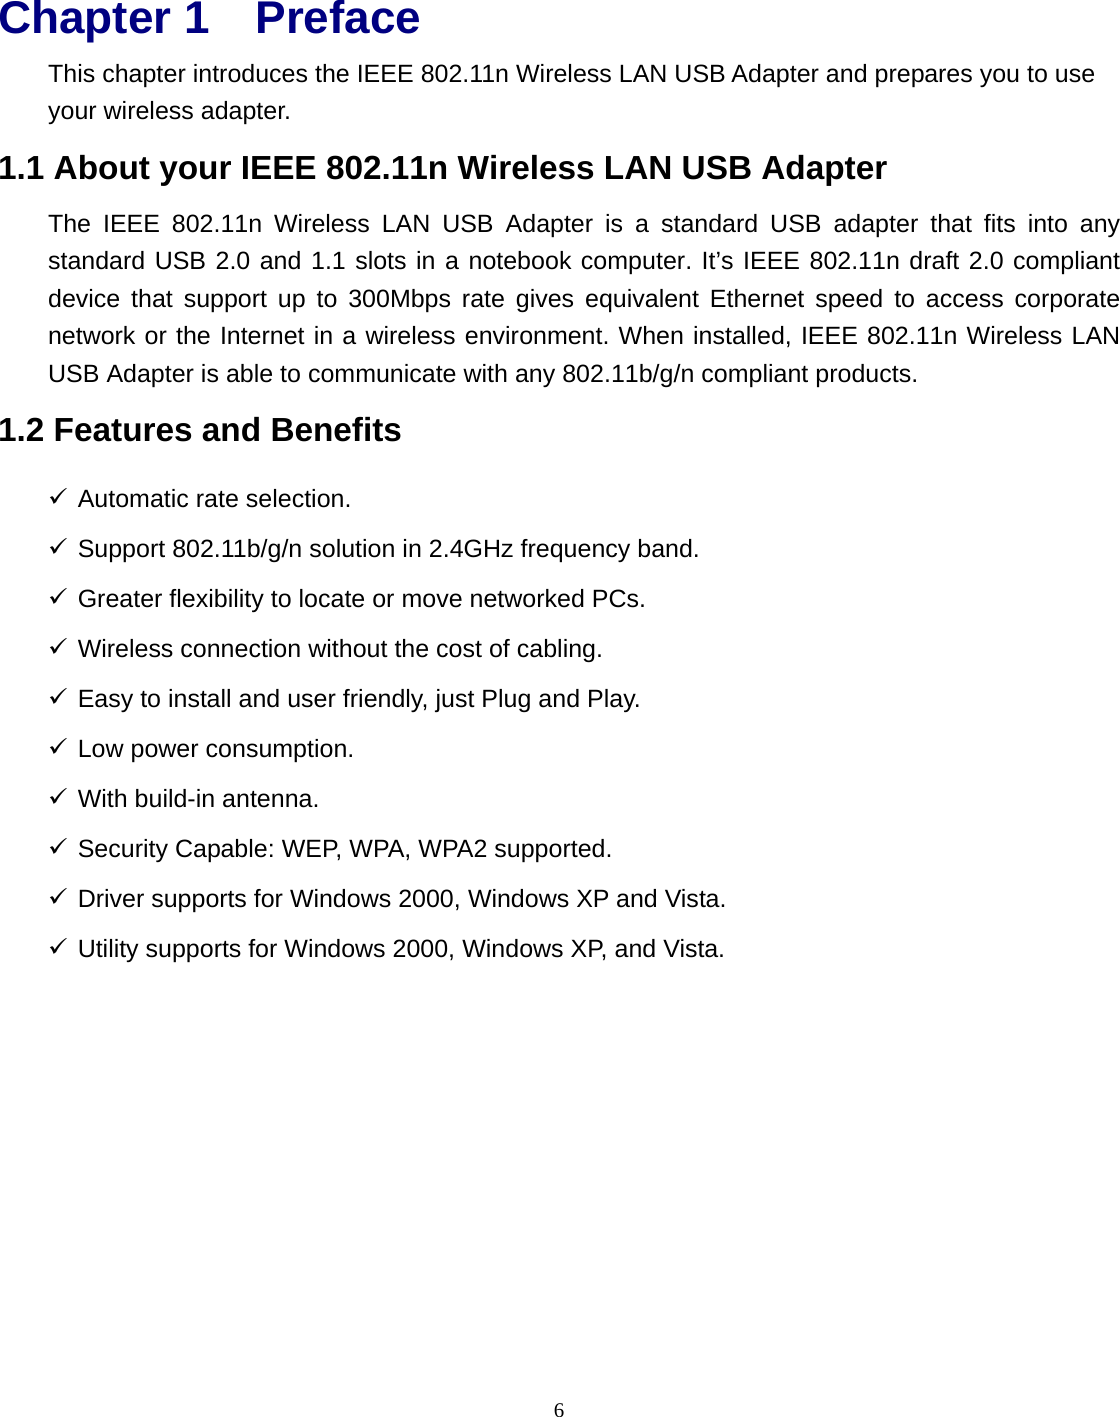  6 Chapter 1 Preface This chapter introduces the IEEE 802.11n Wireless LAN USB Adapter and prepares you to use your wireless adapter. 1.1 About your IEEE 802.11n Wireless LAN USB Adapter The IEEE 802.11n Wireless LAN USB Adapter is a standard USB adapter that fits into any standard USB 2.0 and 1.1 slots in a notebook computer. It’s IEEE 802.11n draft 2.0 compliant device that support up to 300Mbps rate gives equivalent Ethernet speed to access corporate network or the Internet in a wireless environment. When installed, IEEE 802.11n Wireless LAN USB Adapter is able to communicate with any 802.11b/g/n compliant products. 1.2 Features and Benefits 9 Automatic rate selection. 9 Support 802.11b/g/n solution in 2.4GHz frequency band. 9 Greater flexibility to locate or move networked PCs. 9 Wireless connection without the cost of cabling. 9 Easy to install and user friendly, just Plug and Play. 9 Low power consumption. 9 With build-in antenna. 9 Security Capable: WEP, WPA, WPA2 supported. 9 Driver supports for Windows 2000, Windows XP and Vista. 9 Utility supports for Windows 2000, Windows XP, and Vista. 